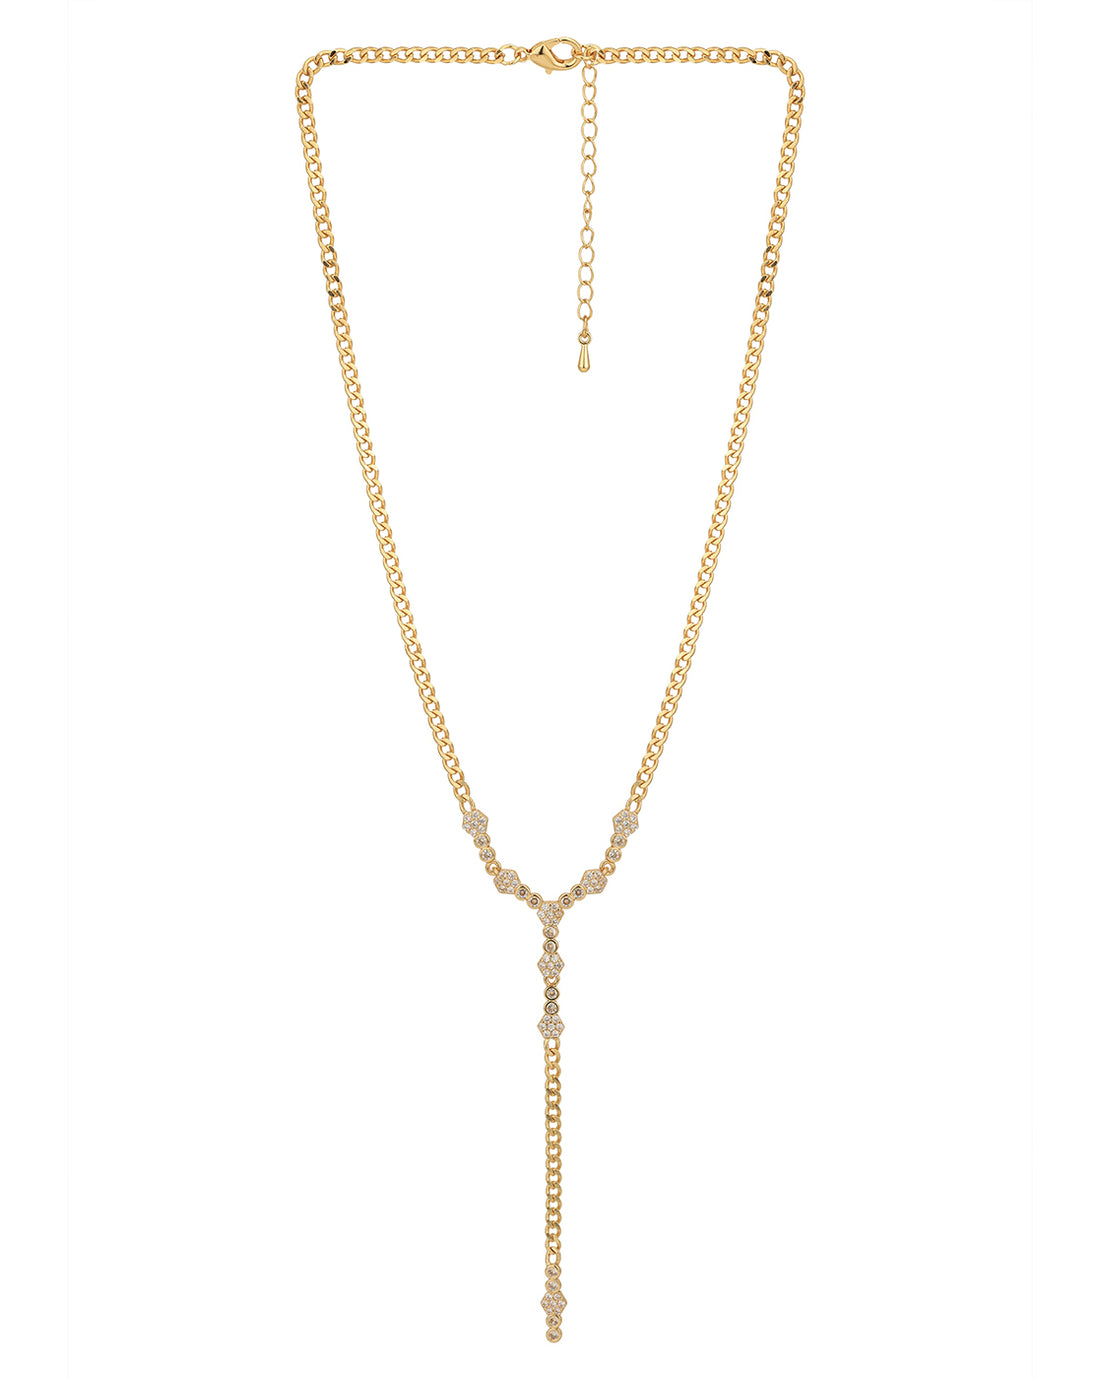 Premium Gold Plated CZ Lariat Necklace for women